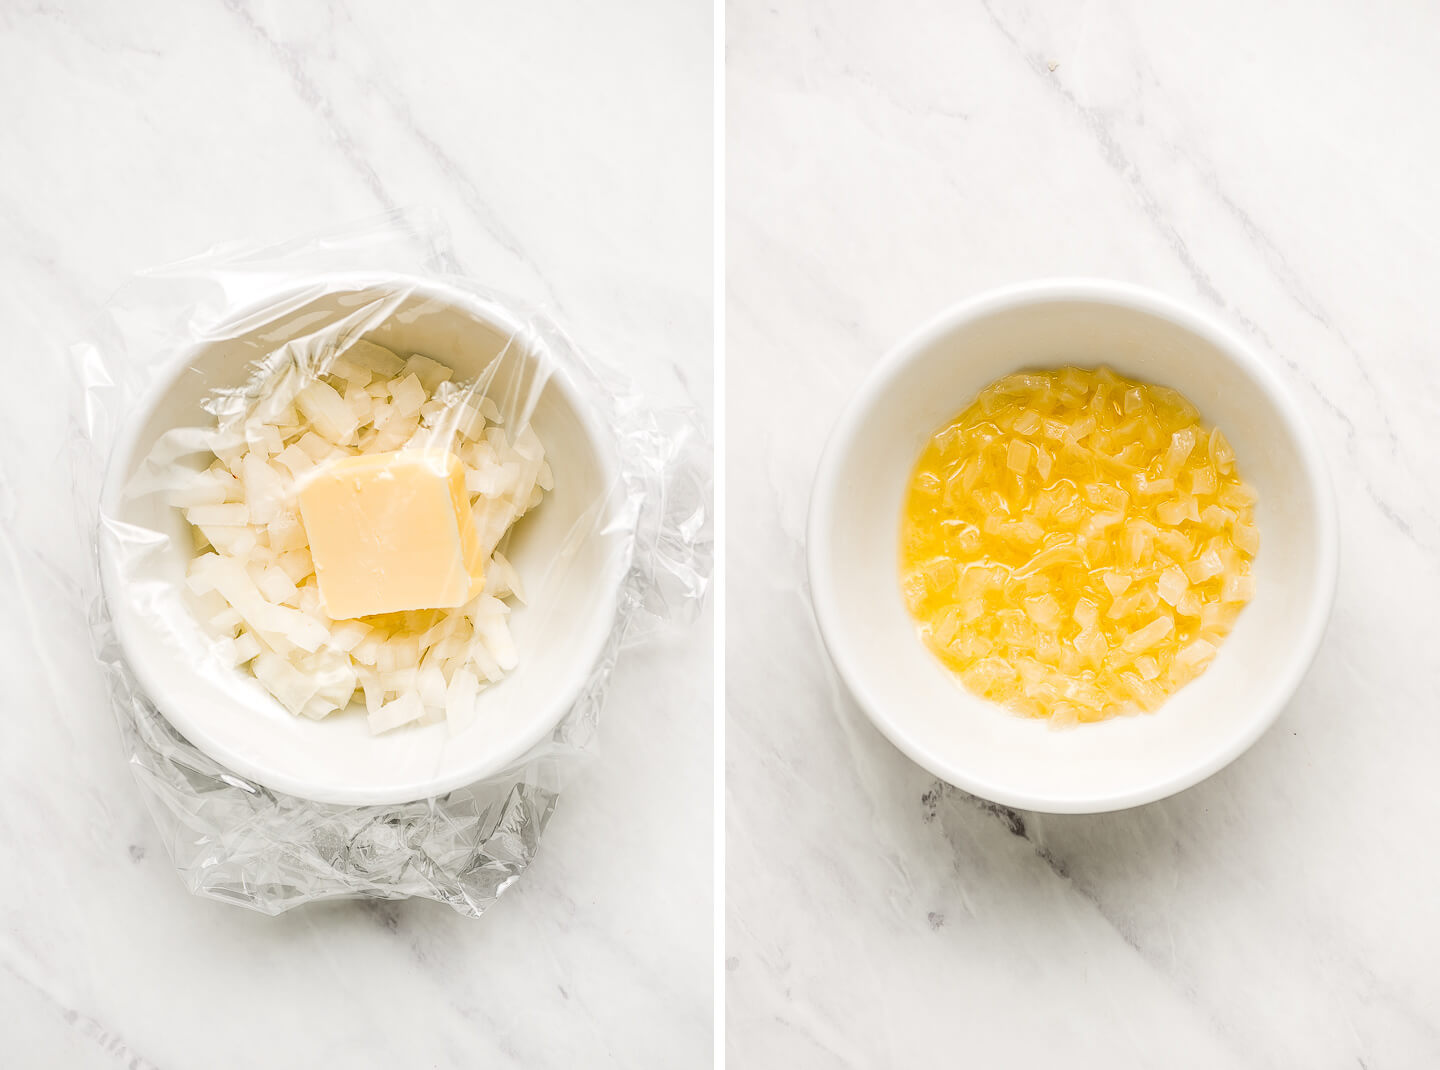 Diptych- Onion and a pat of butter in a bowl covered with plastic; wrap; softened onions in melted butter.